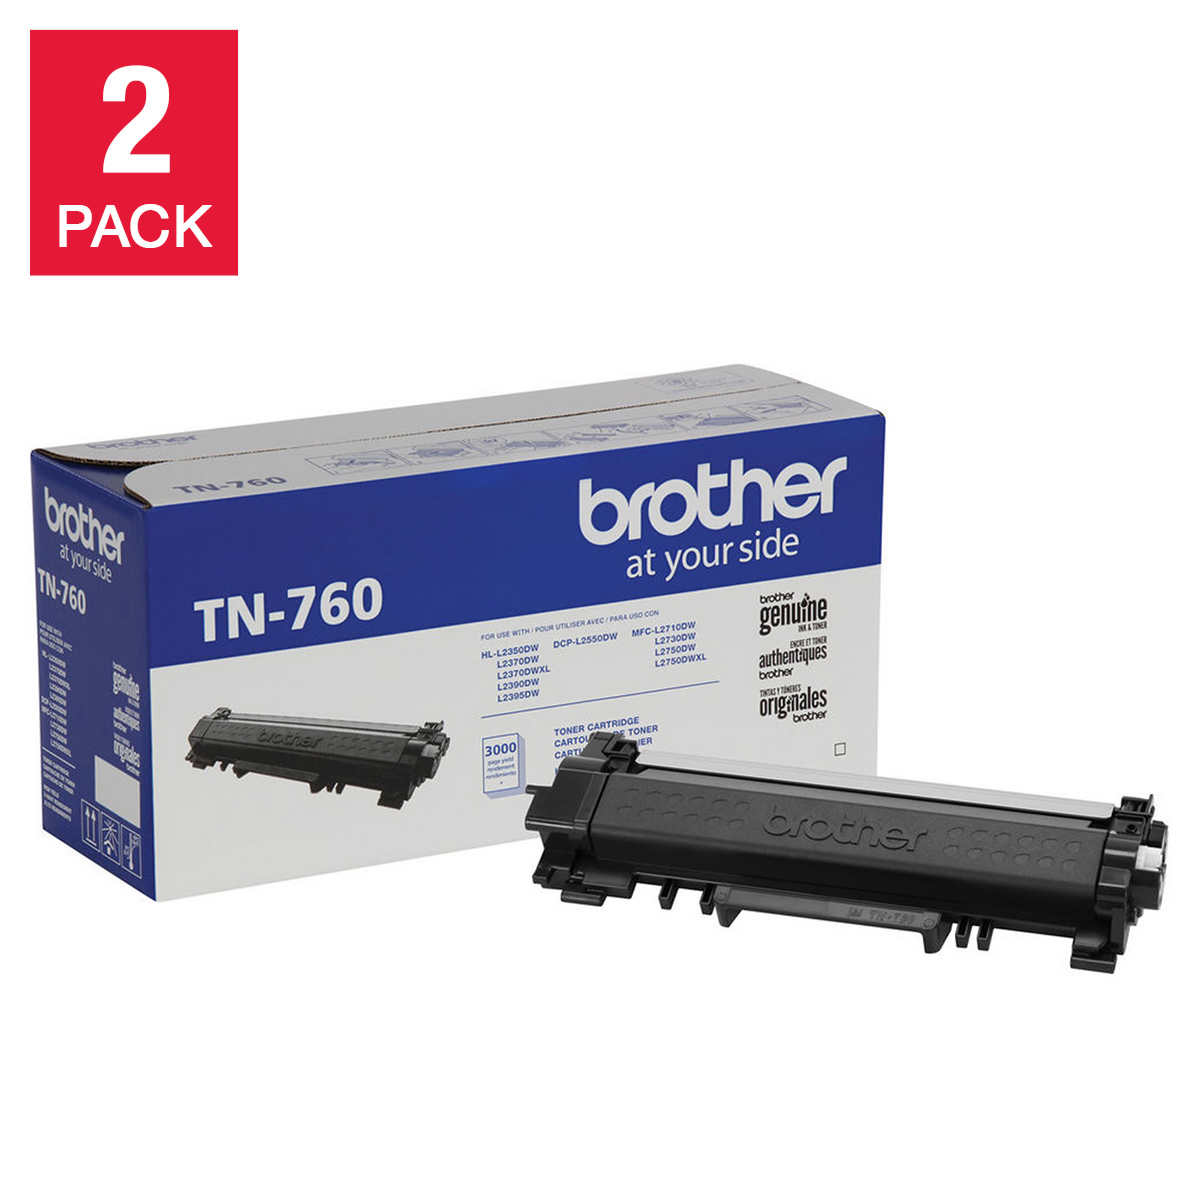 GCP Products GCP-923-698093 5X Compatible For Brother Tn760 Toner